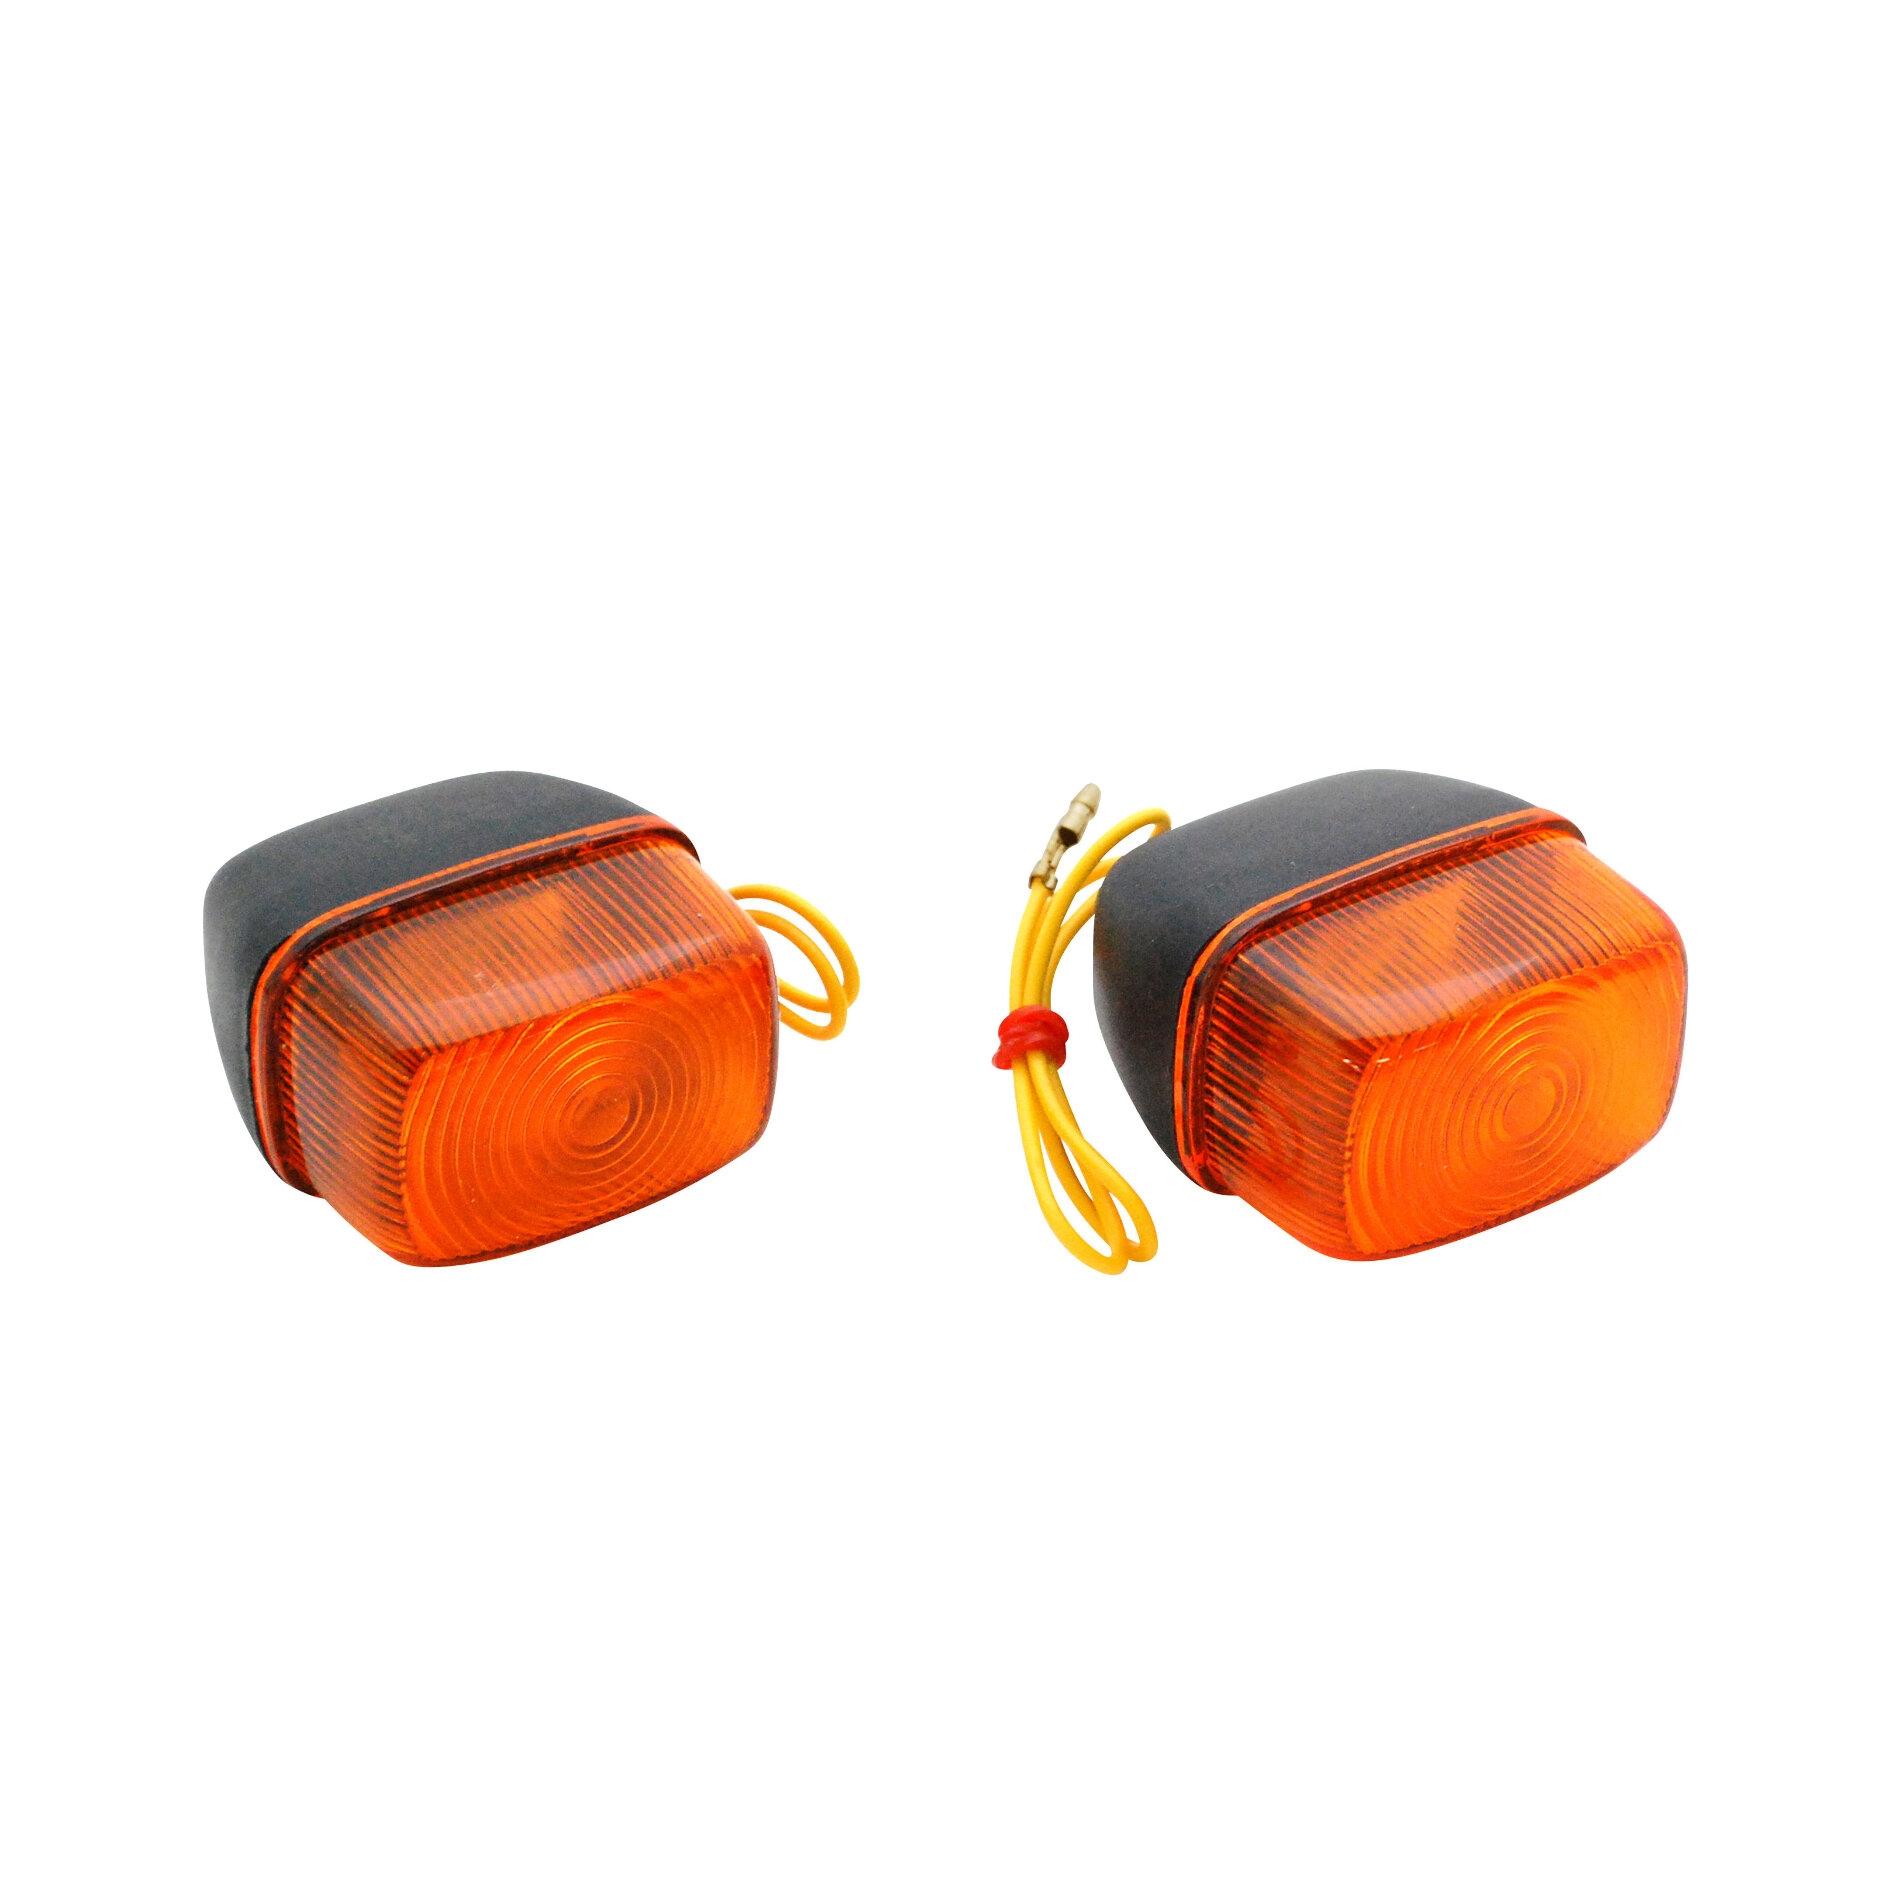 Clignotants orange ronds universels motos, scooters